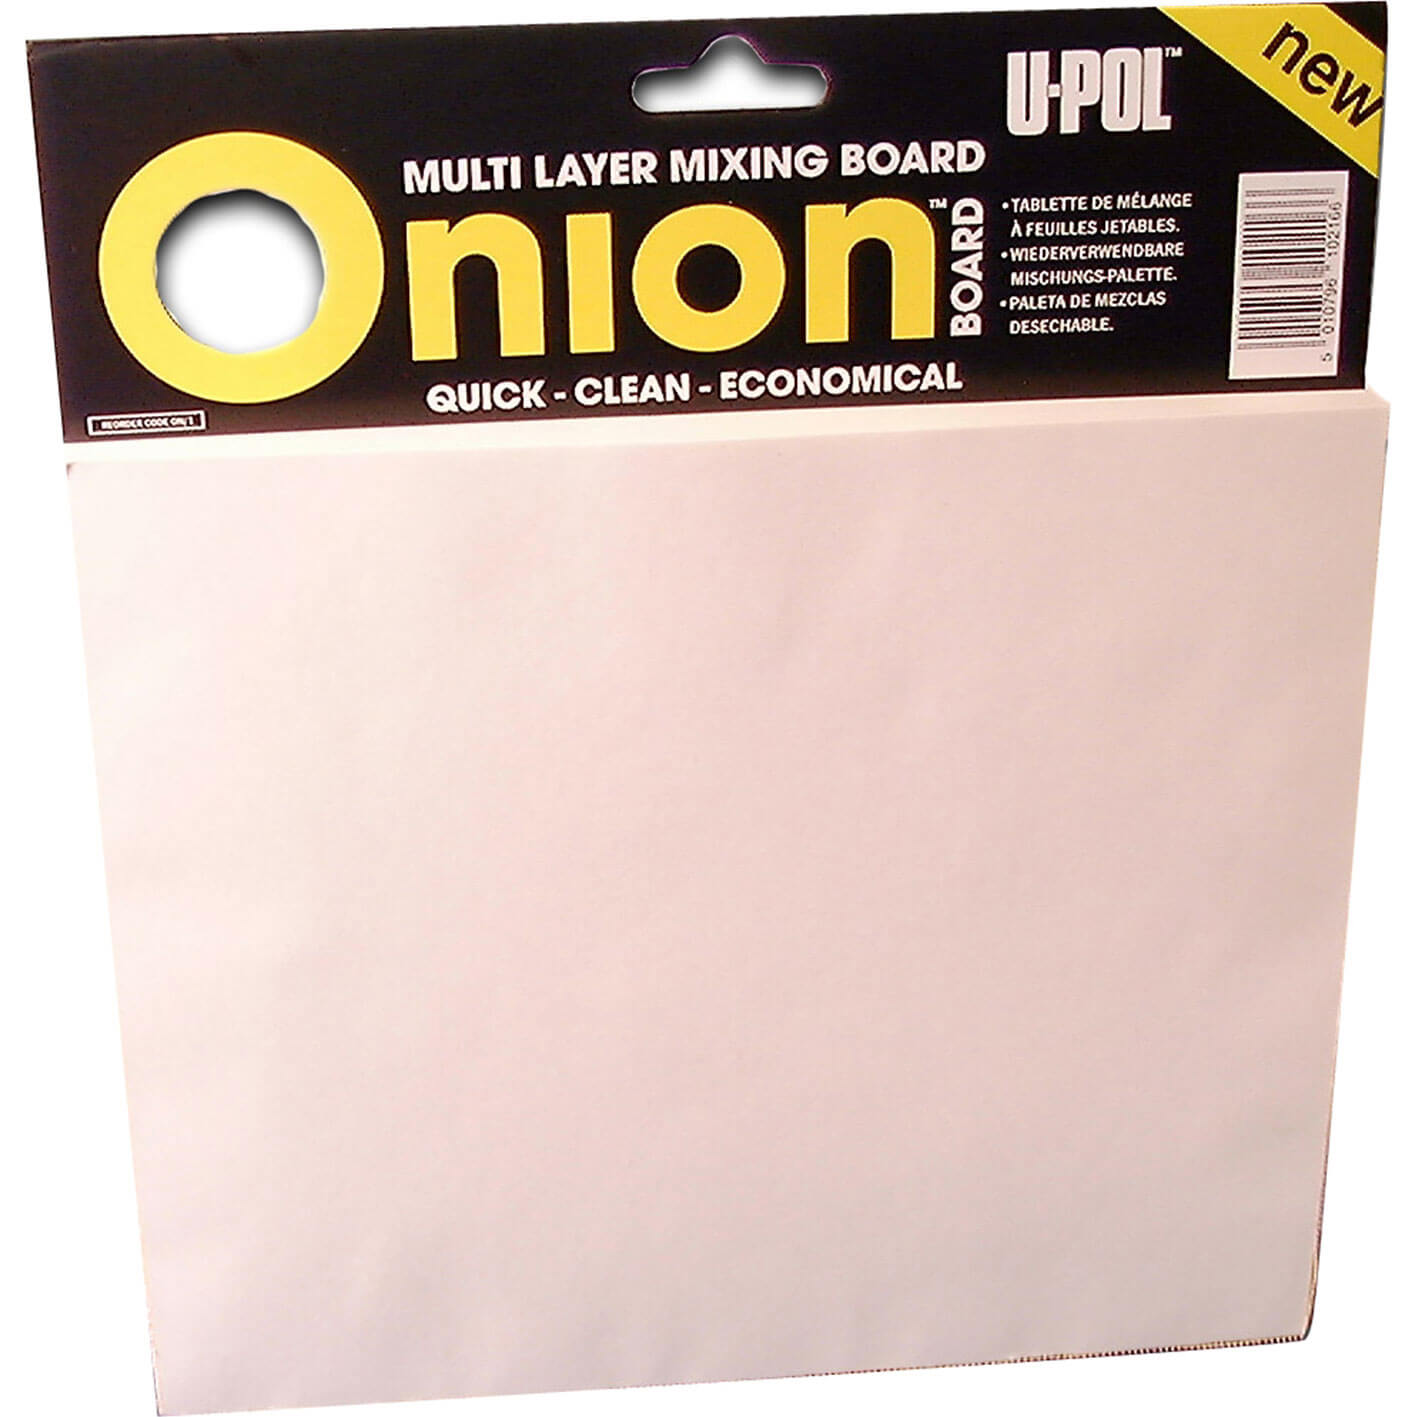 Photo of Upo Isopon Onion Board Mult Page Mixing Pallette